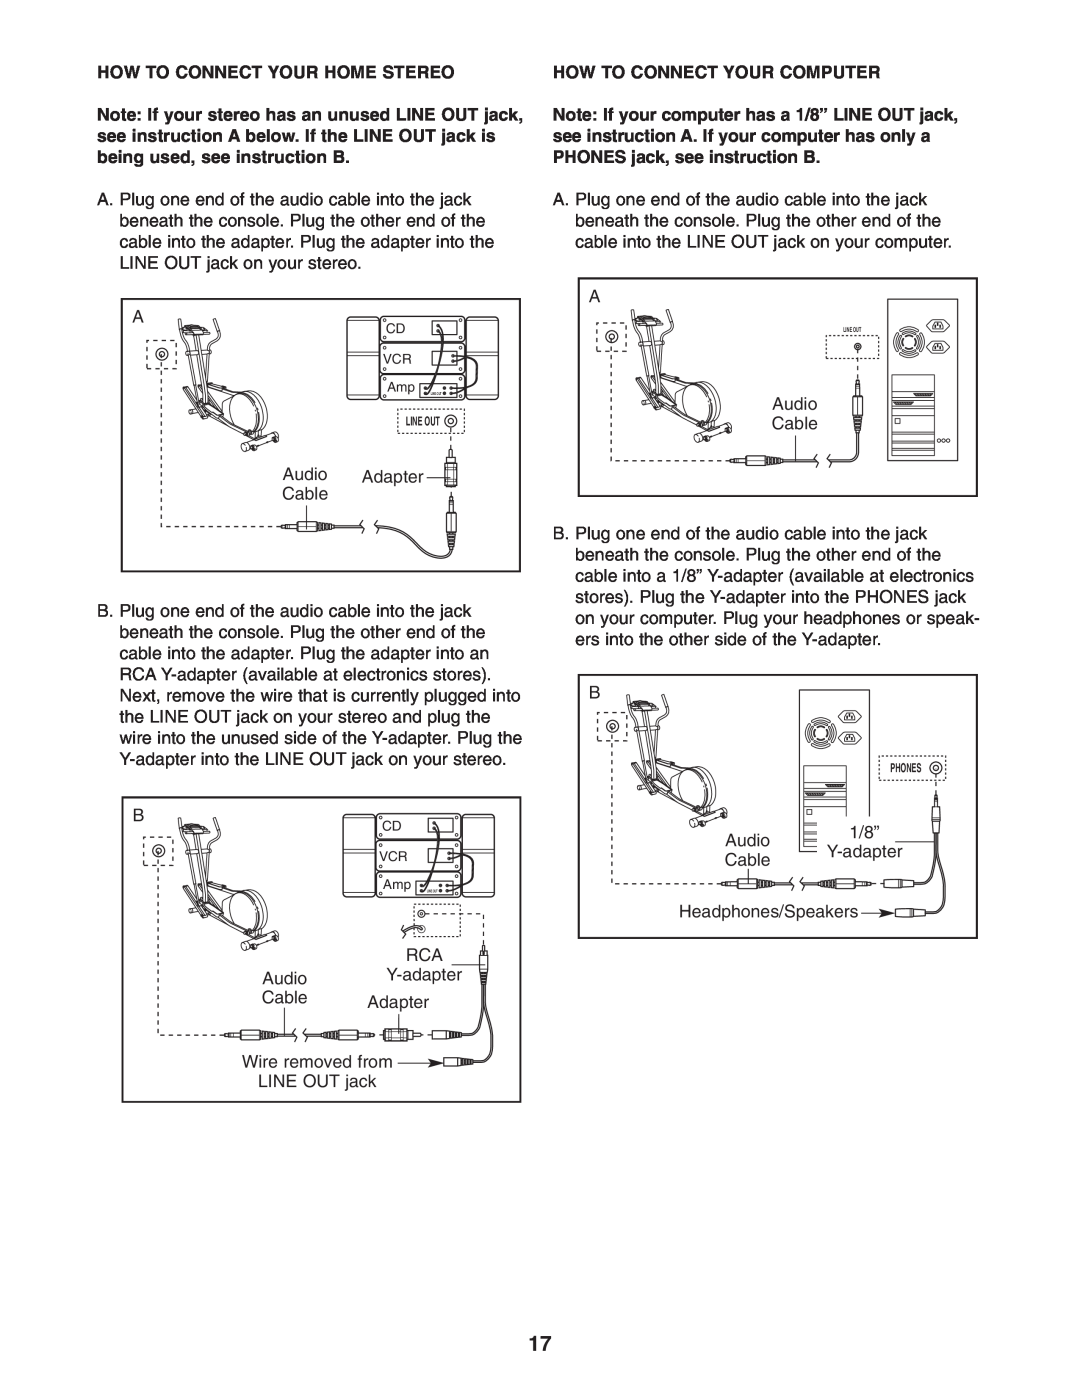 NordicTrack NEL7095.1 user manual How To Connect Your Home Stereo, How To Connect Your Computer, Amp LINE OUT, Line Out 